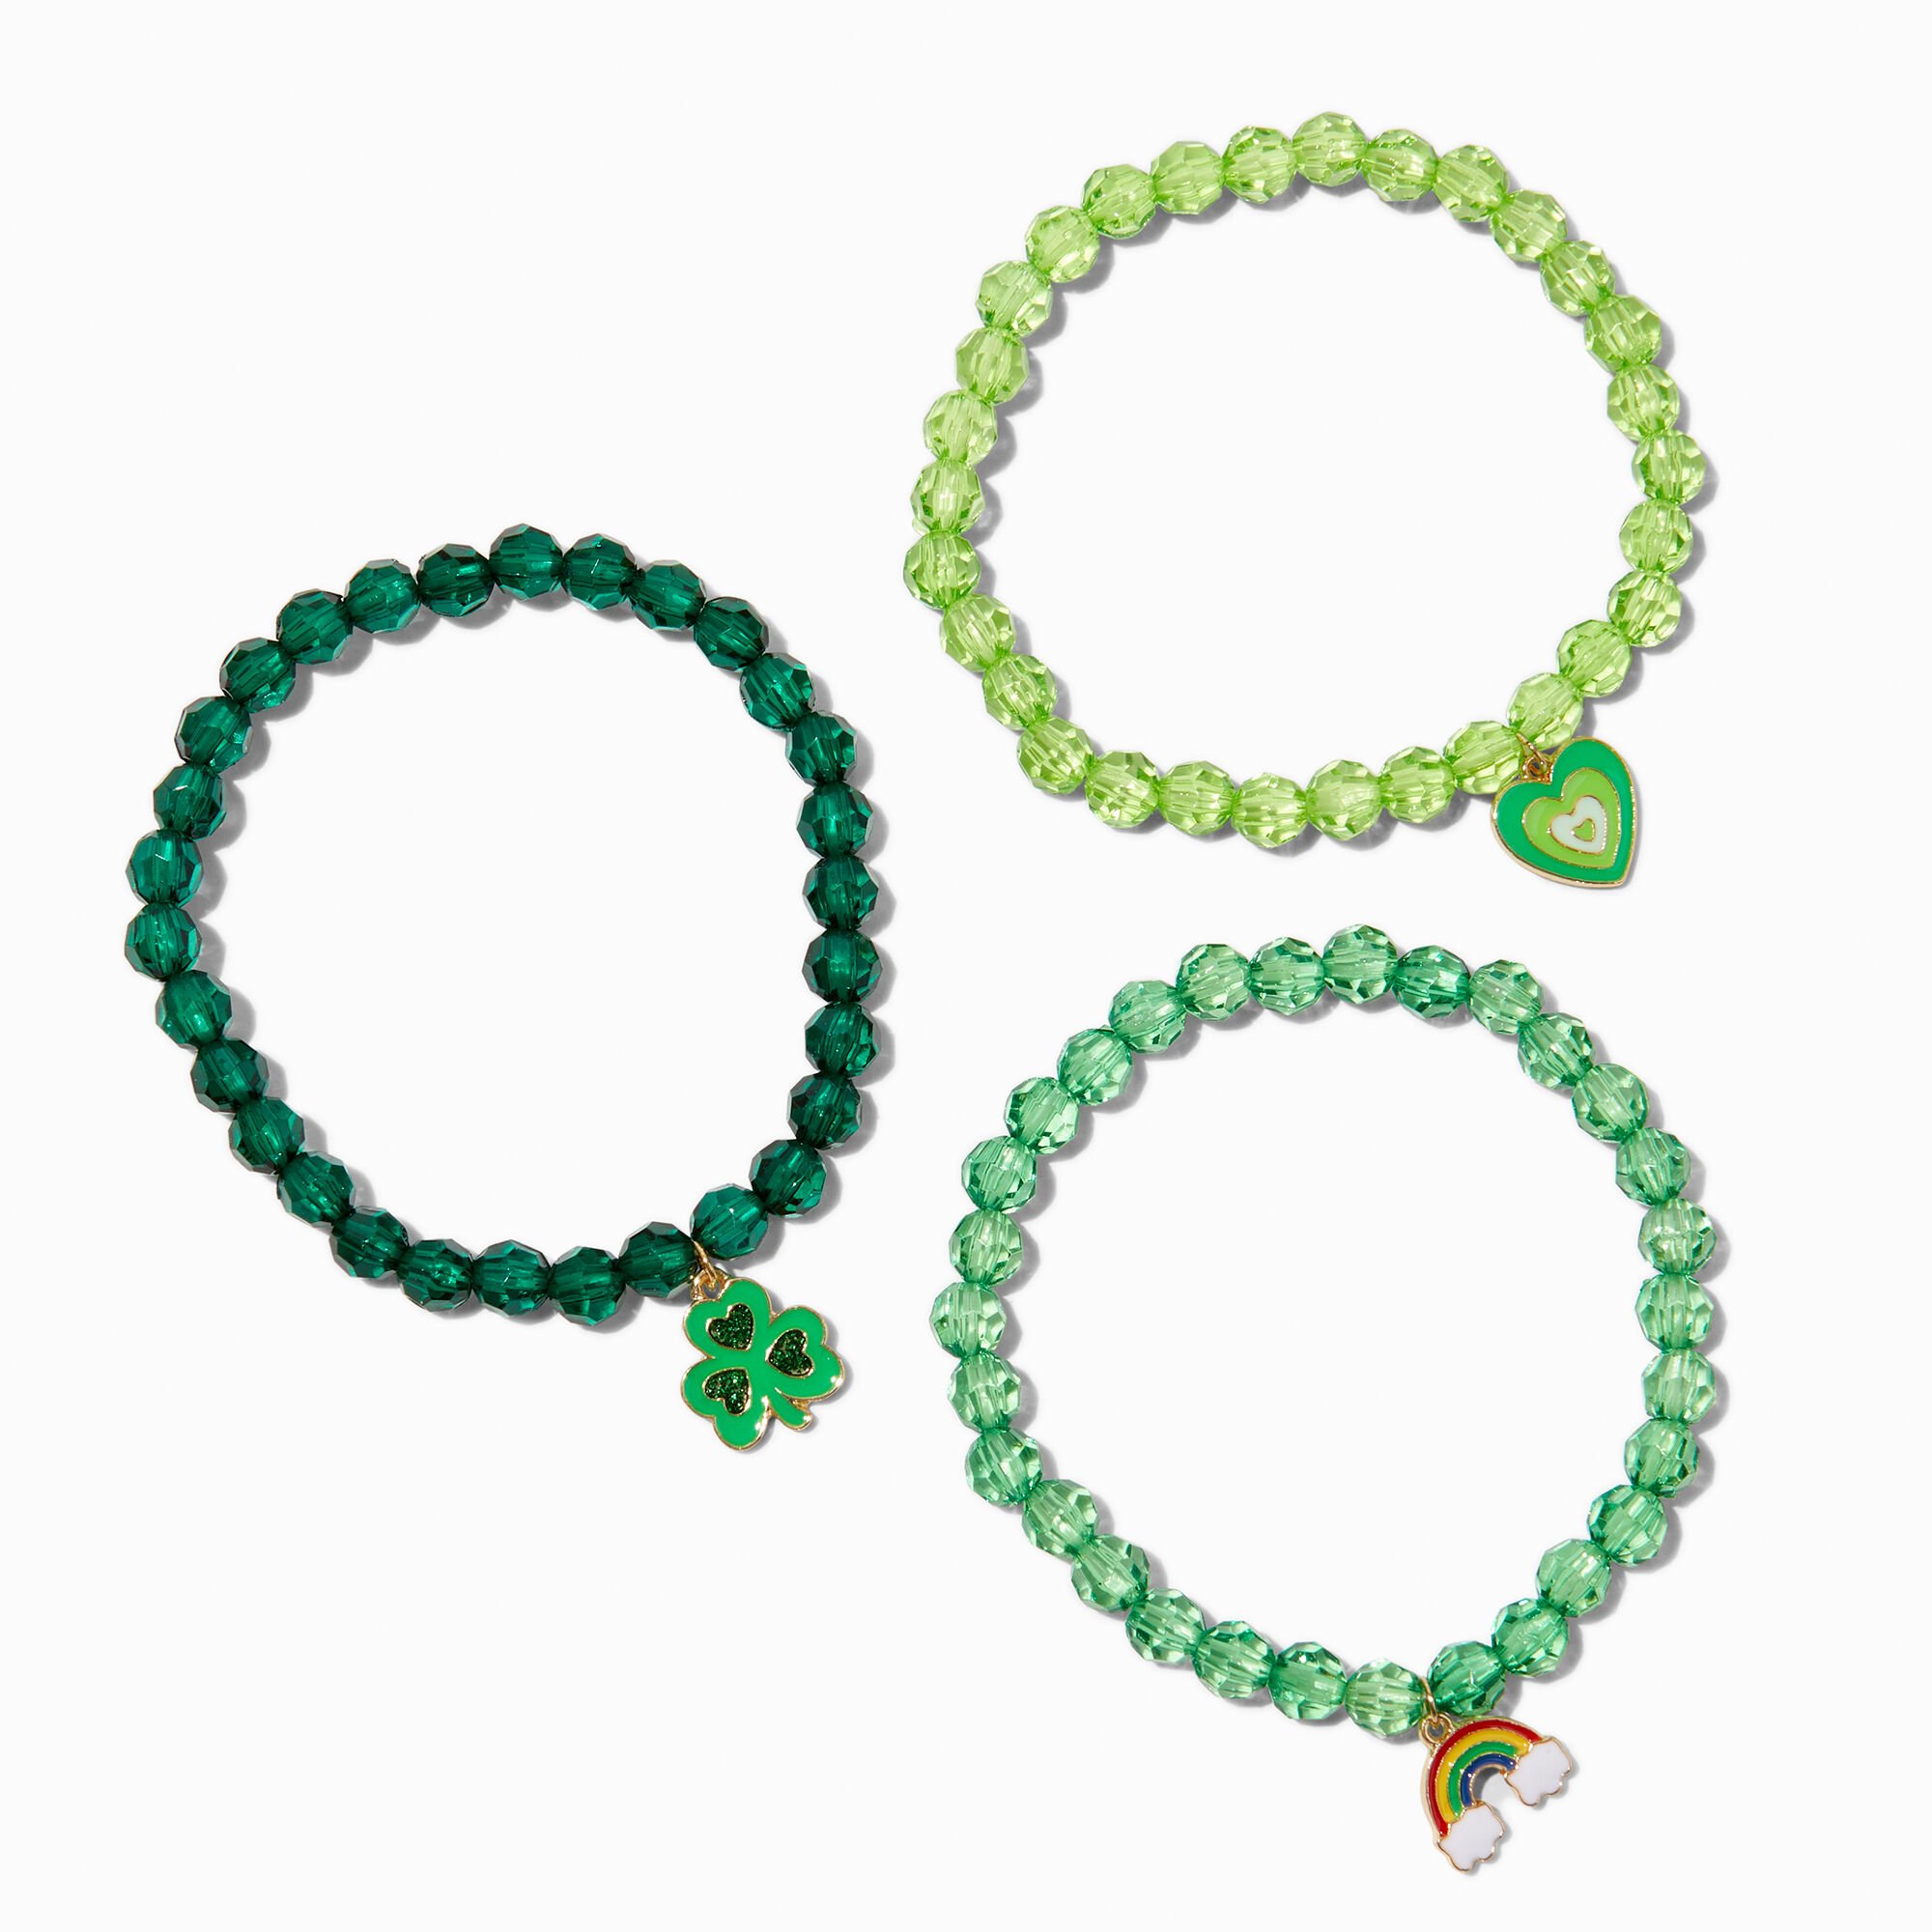 View Claires St Patricks Day Beaded Stretch Charm Bracelets 3 Pack information